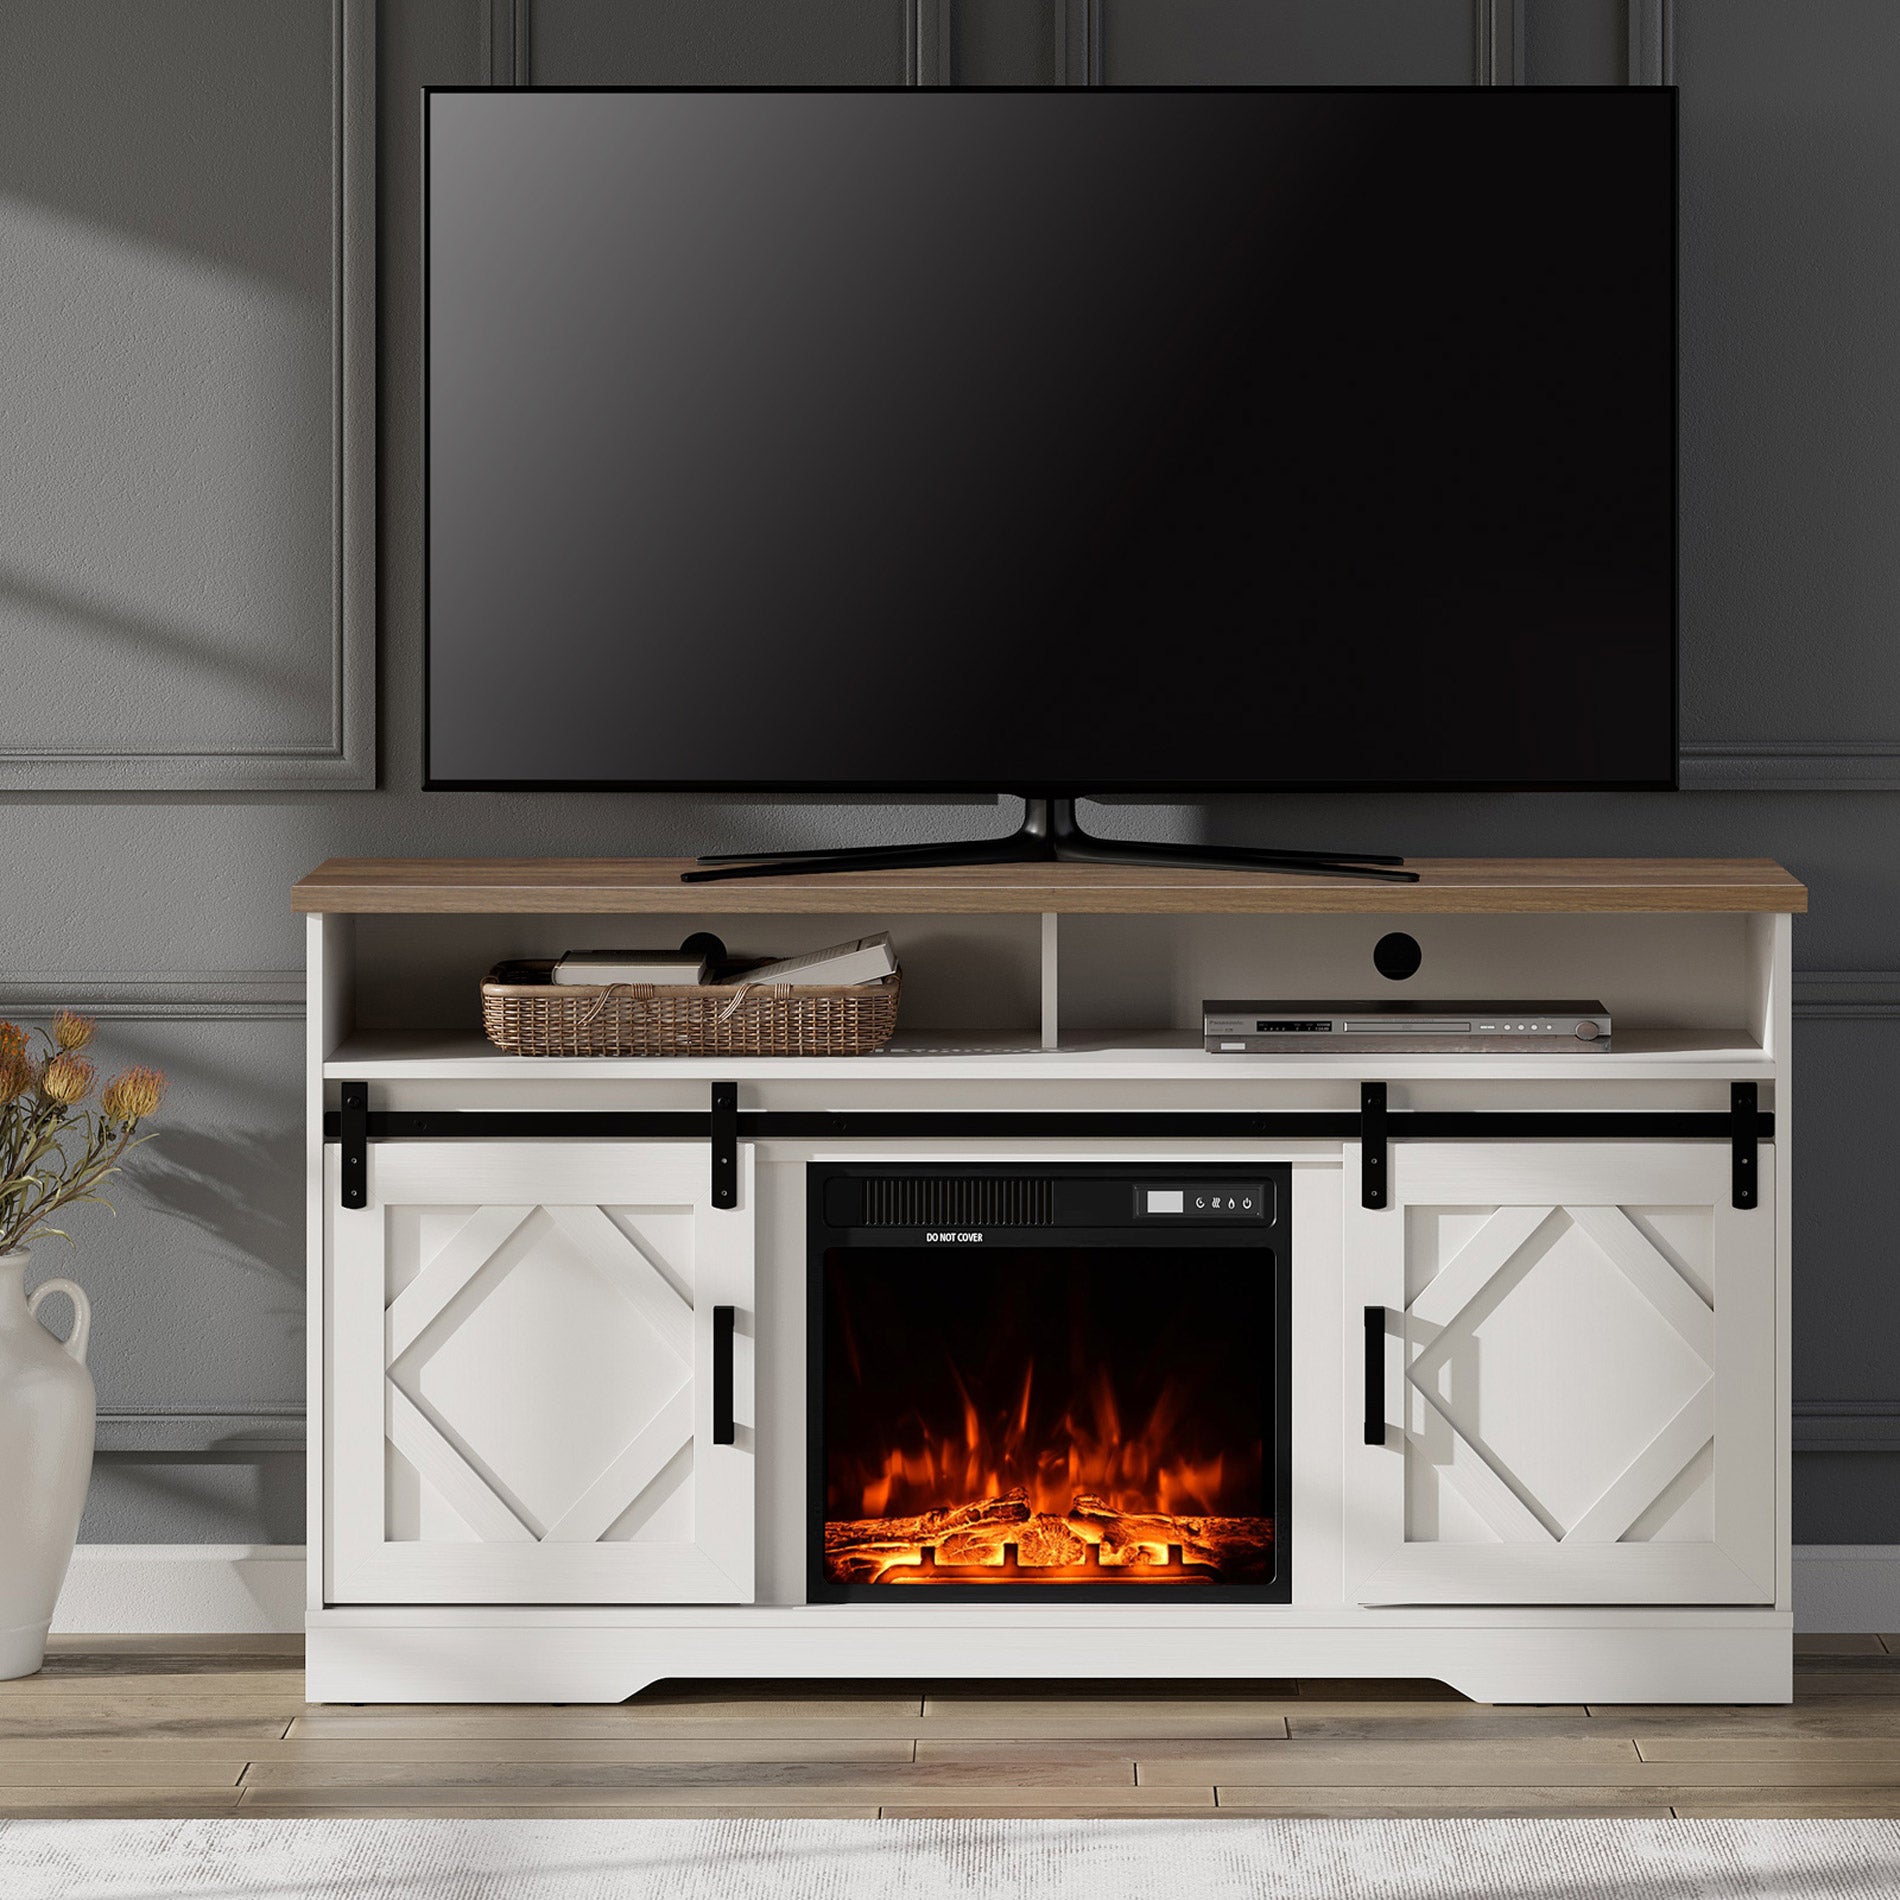 WAMPAT 60" Electric Fireplace TV Stand for TVs Up to 65 Inch, Farmhouse Wood Entertainment Center with Electric Fireplace, White